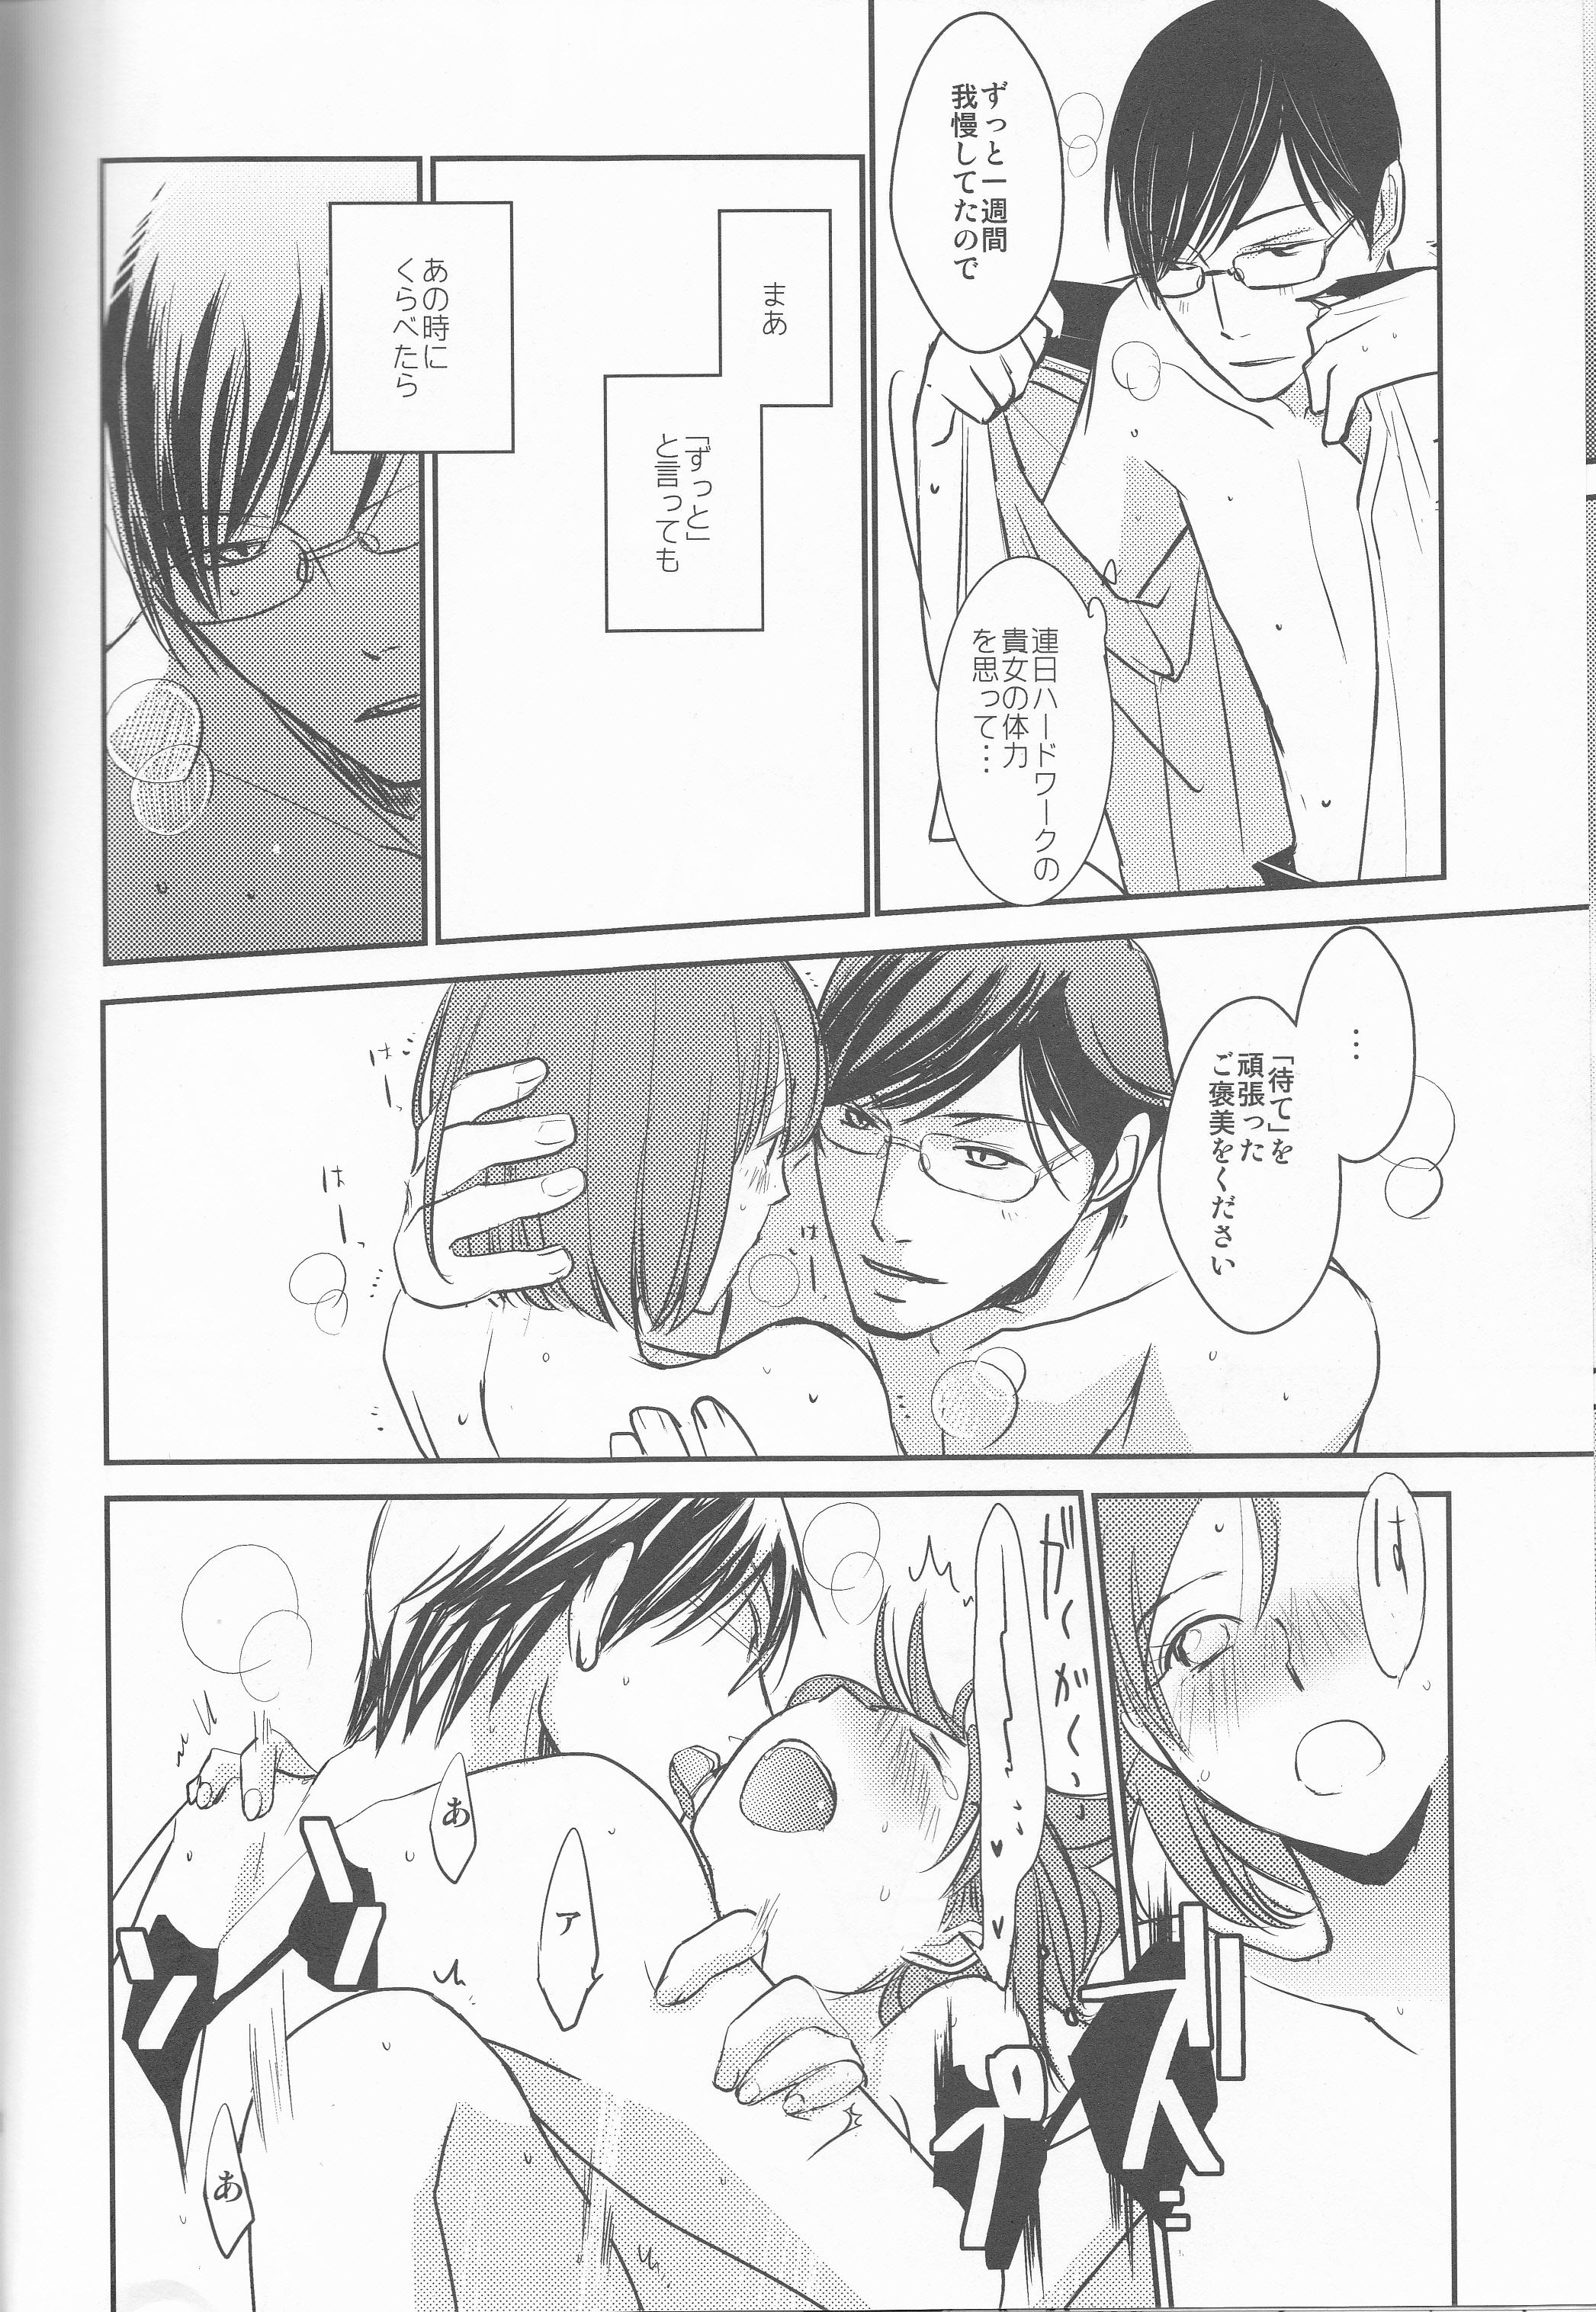 Online darling darling darling - Scared rider xechs Fist - Page 12